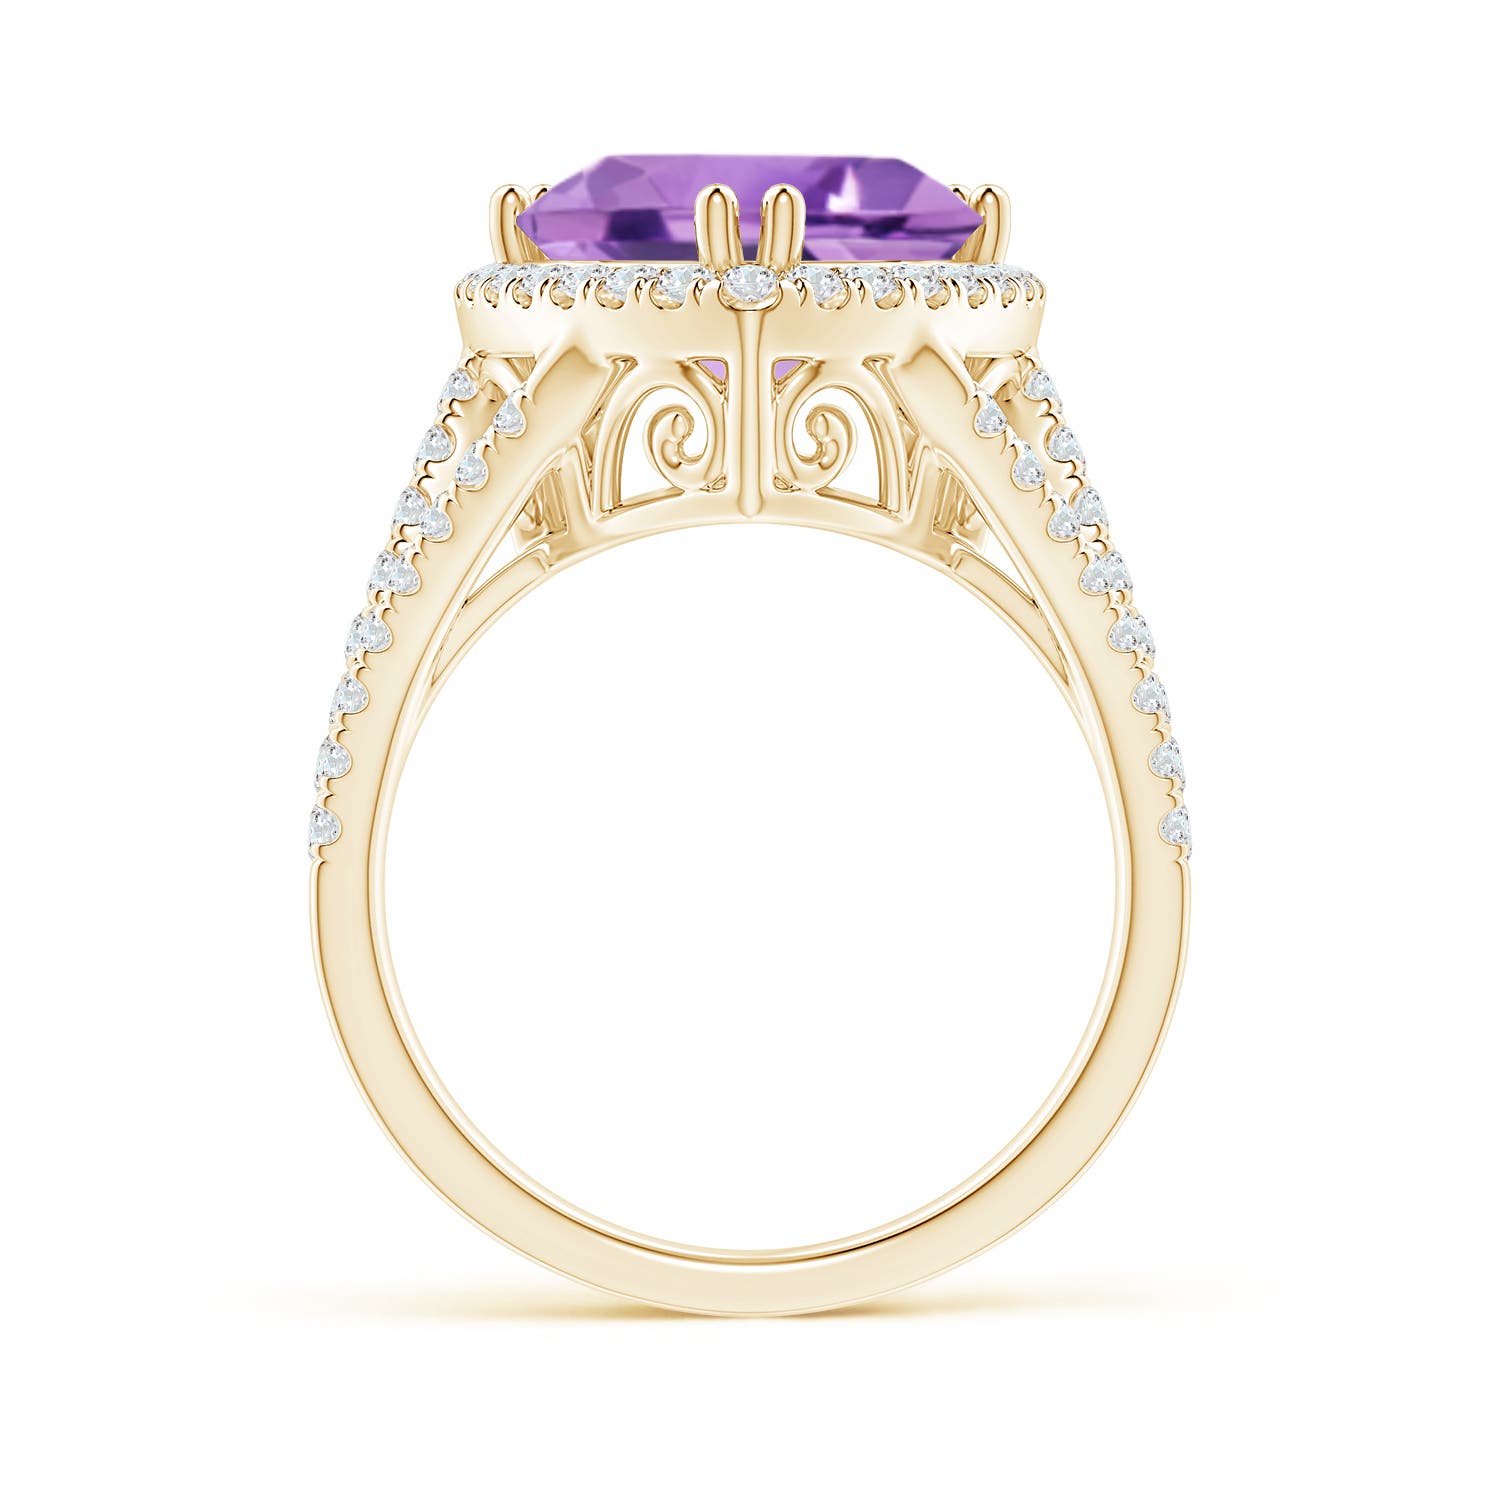 A - Amethyst / 4.47 CT / 14 KT Yellow Gold